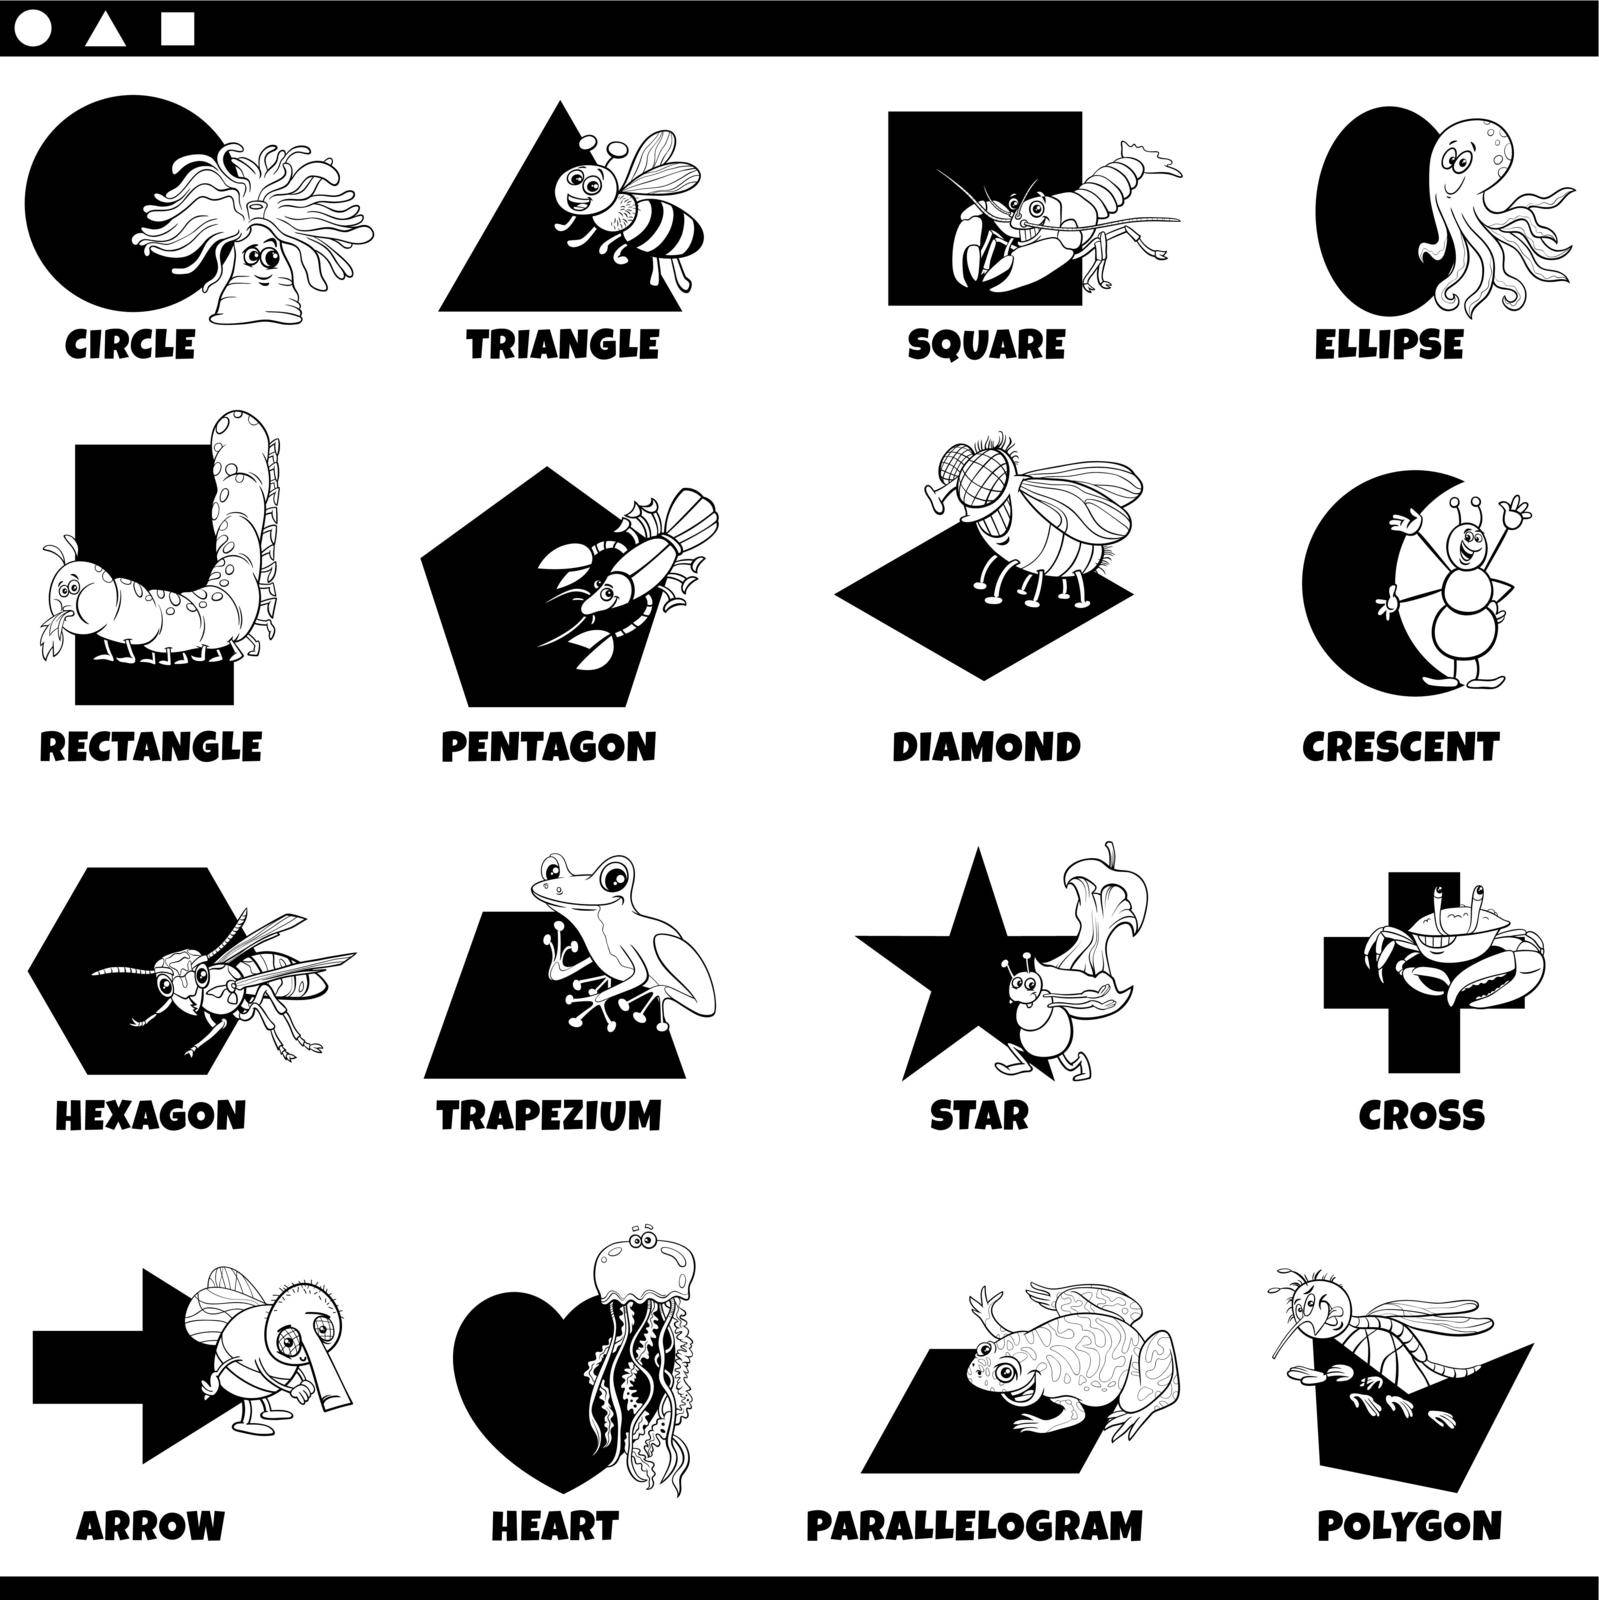 Black and white educational cartoon illustration of basic geometric shapes with captions and animal characters for preschool and elementary age children